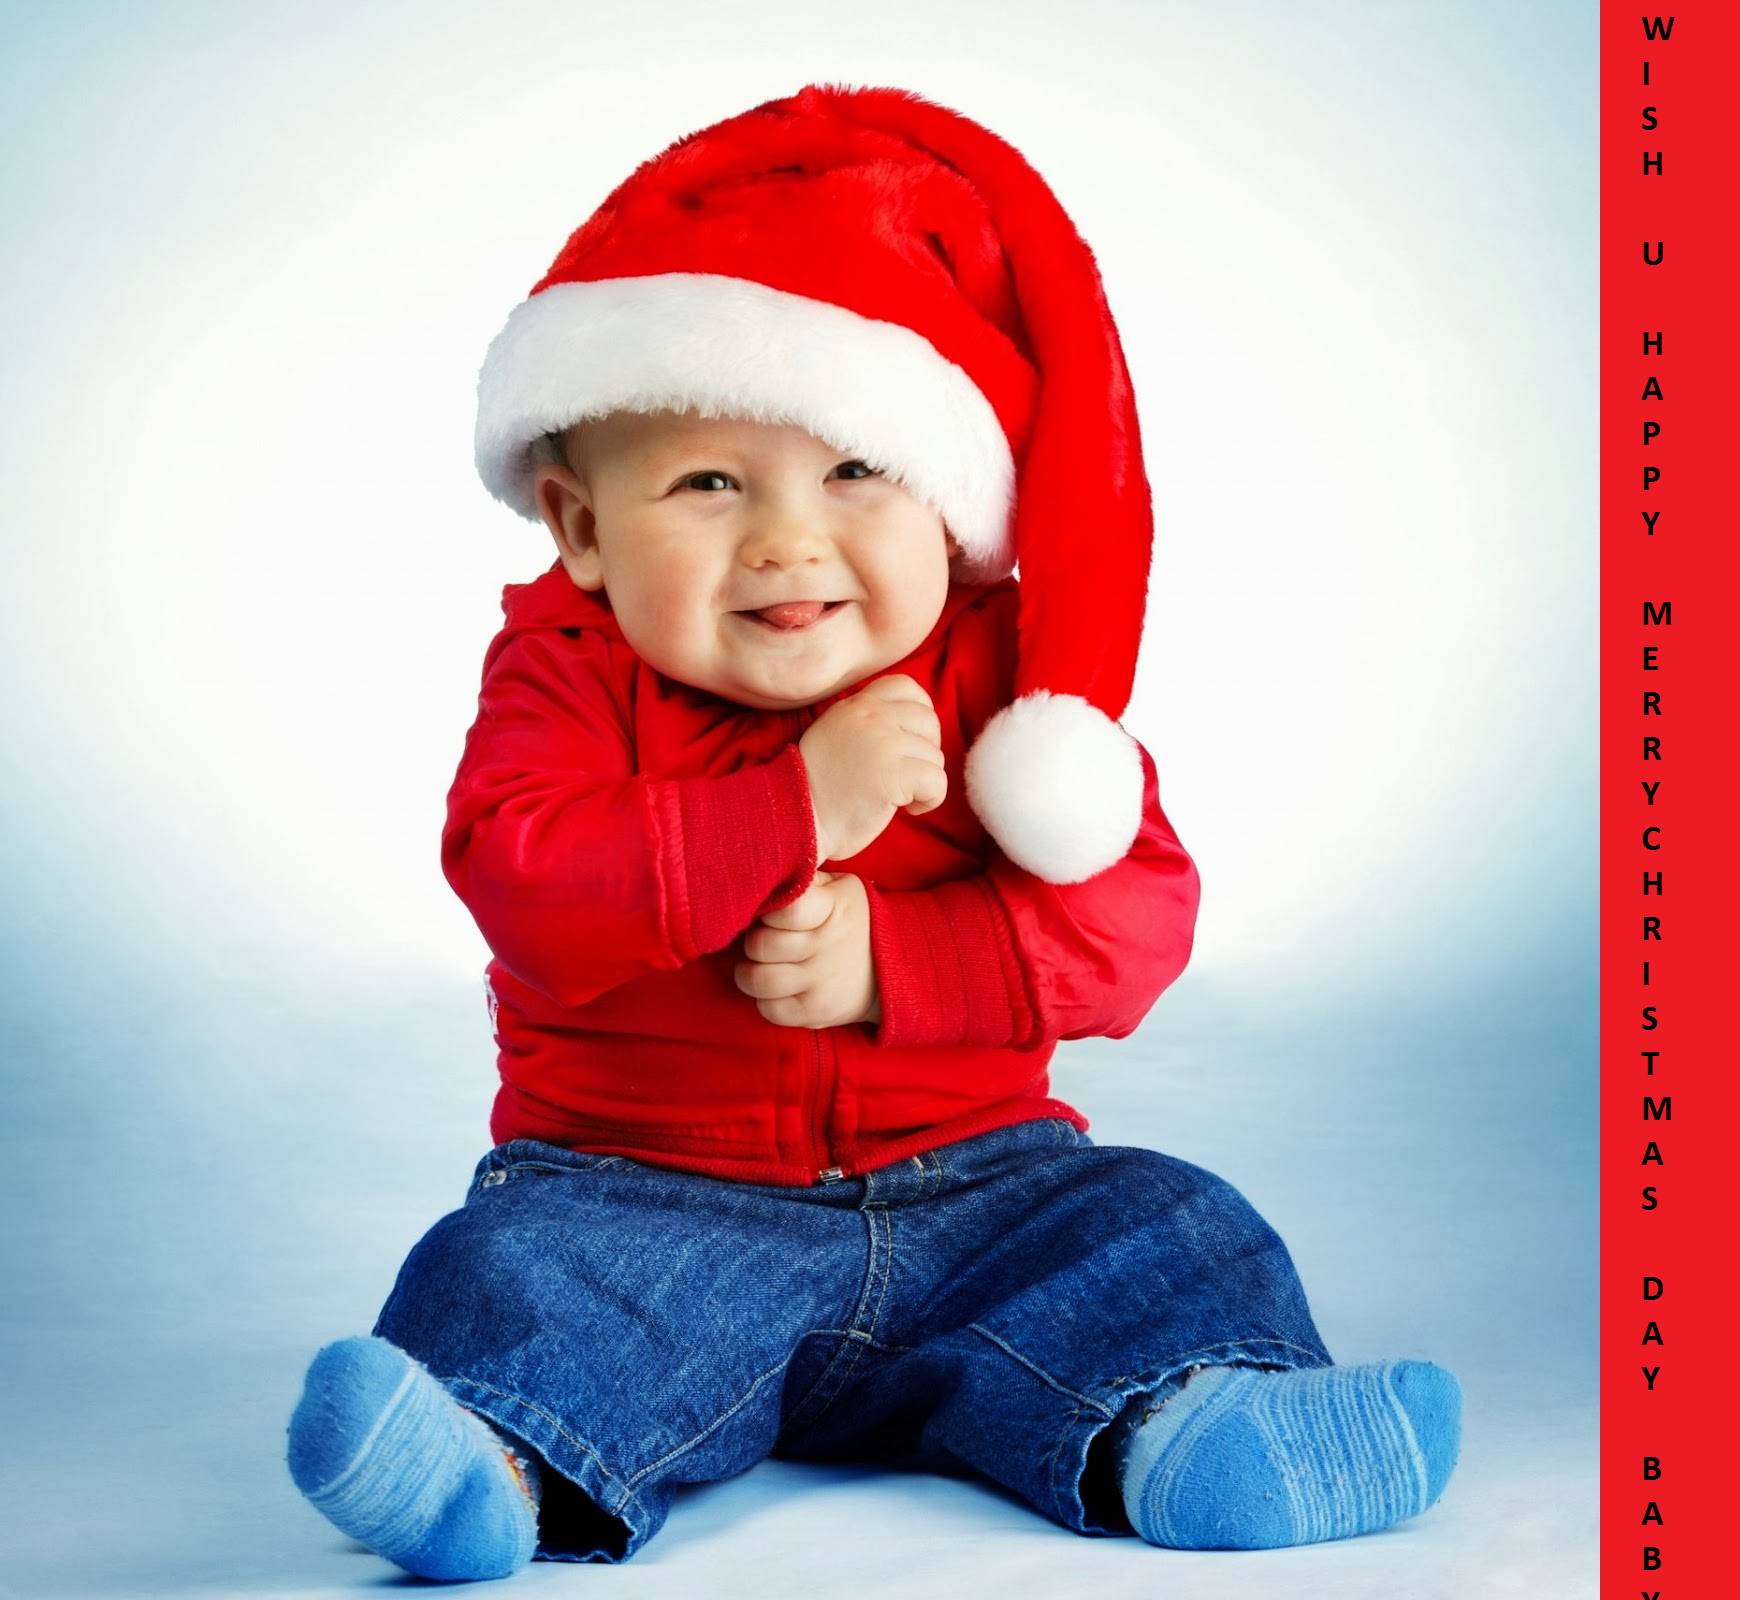 Cute Christmas Baby picture - Imgur